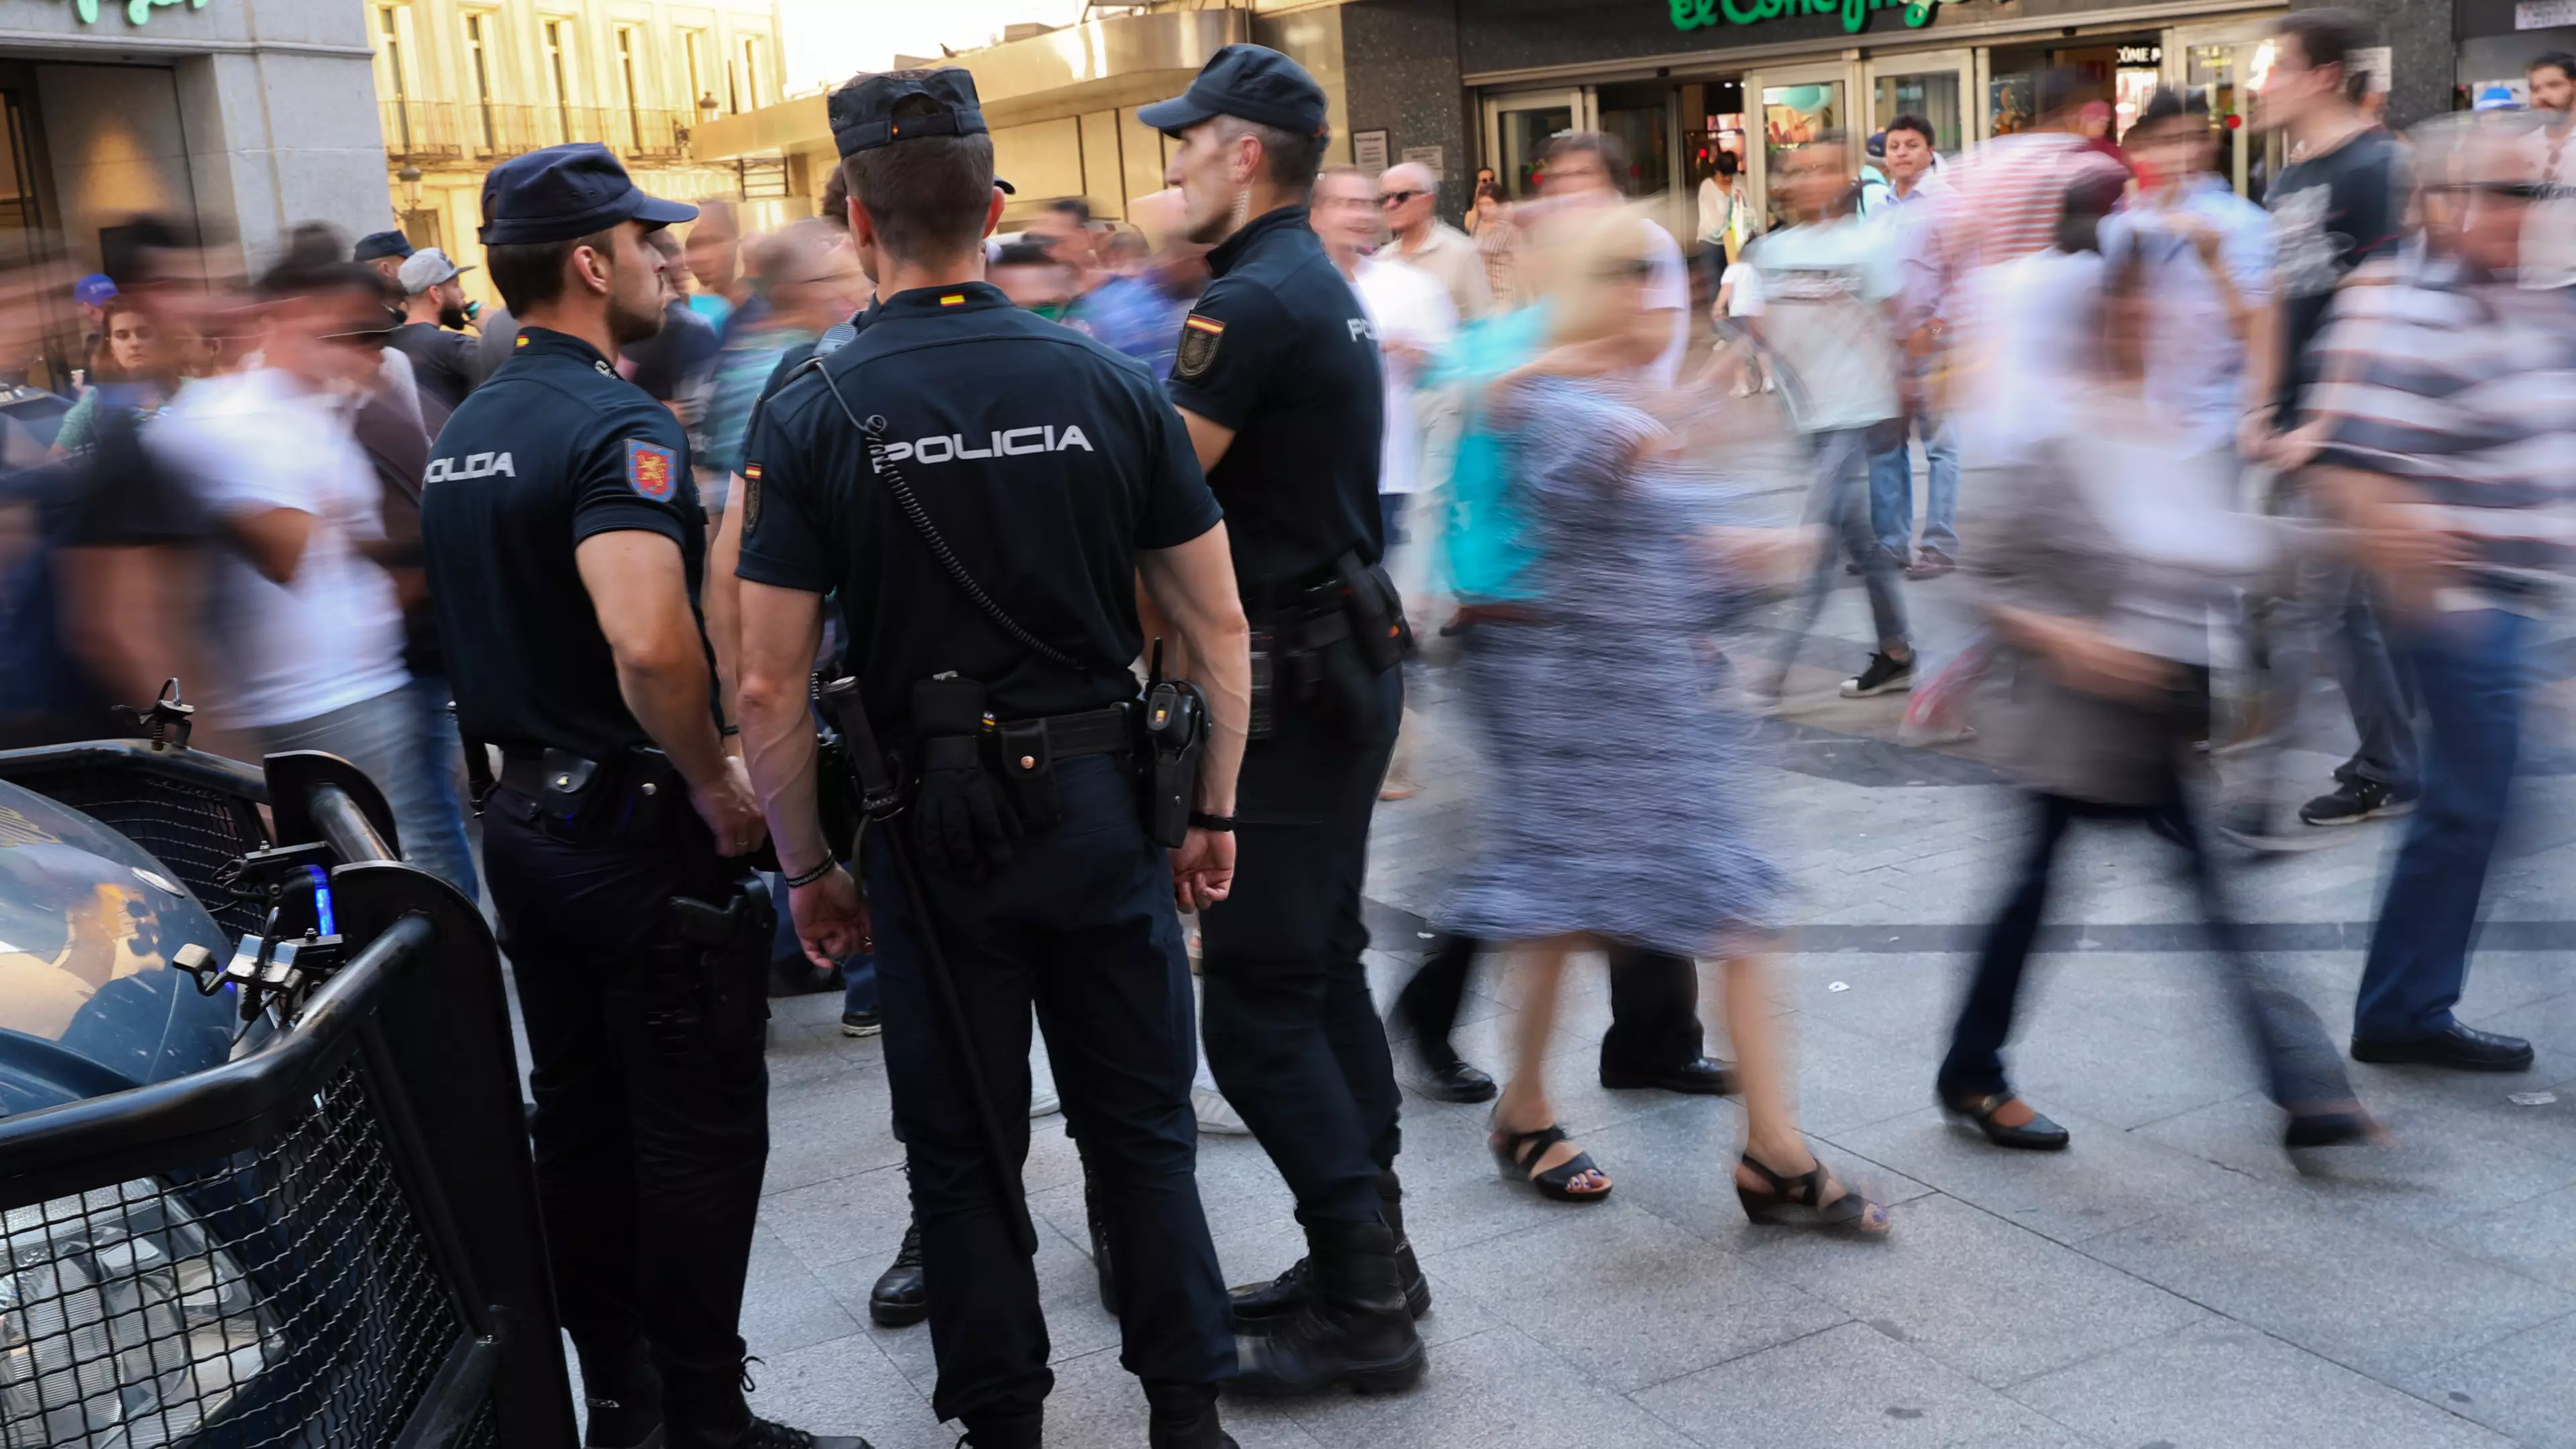 British Man Arrested In Madrid For 'Stripping, Masturbating And Attacking Tourist' 